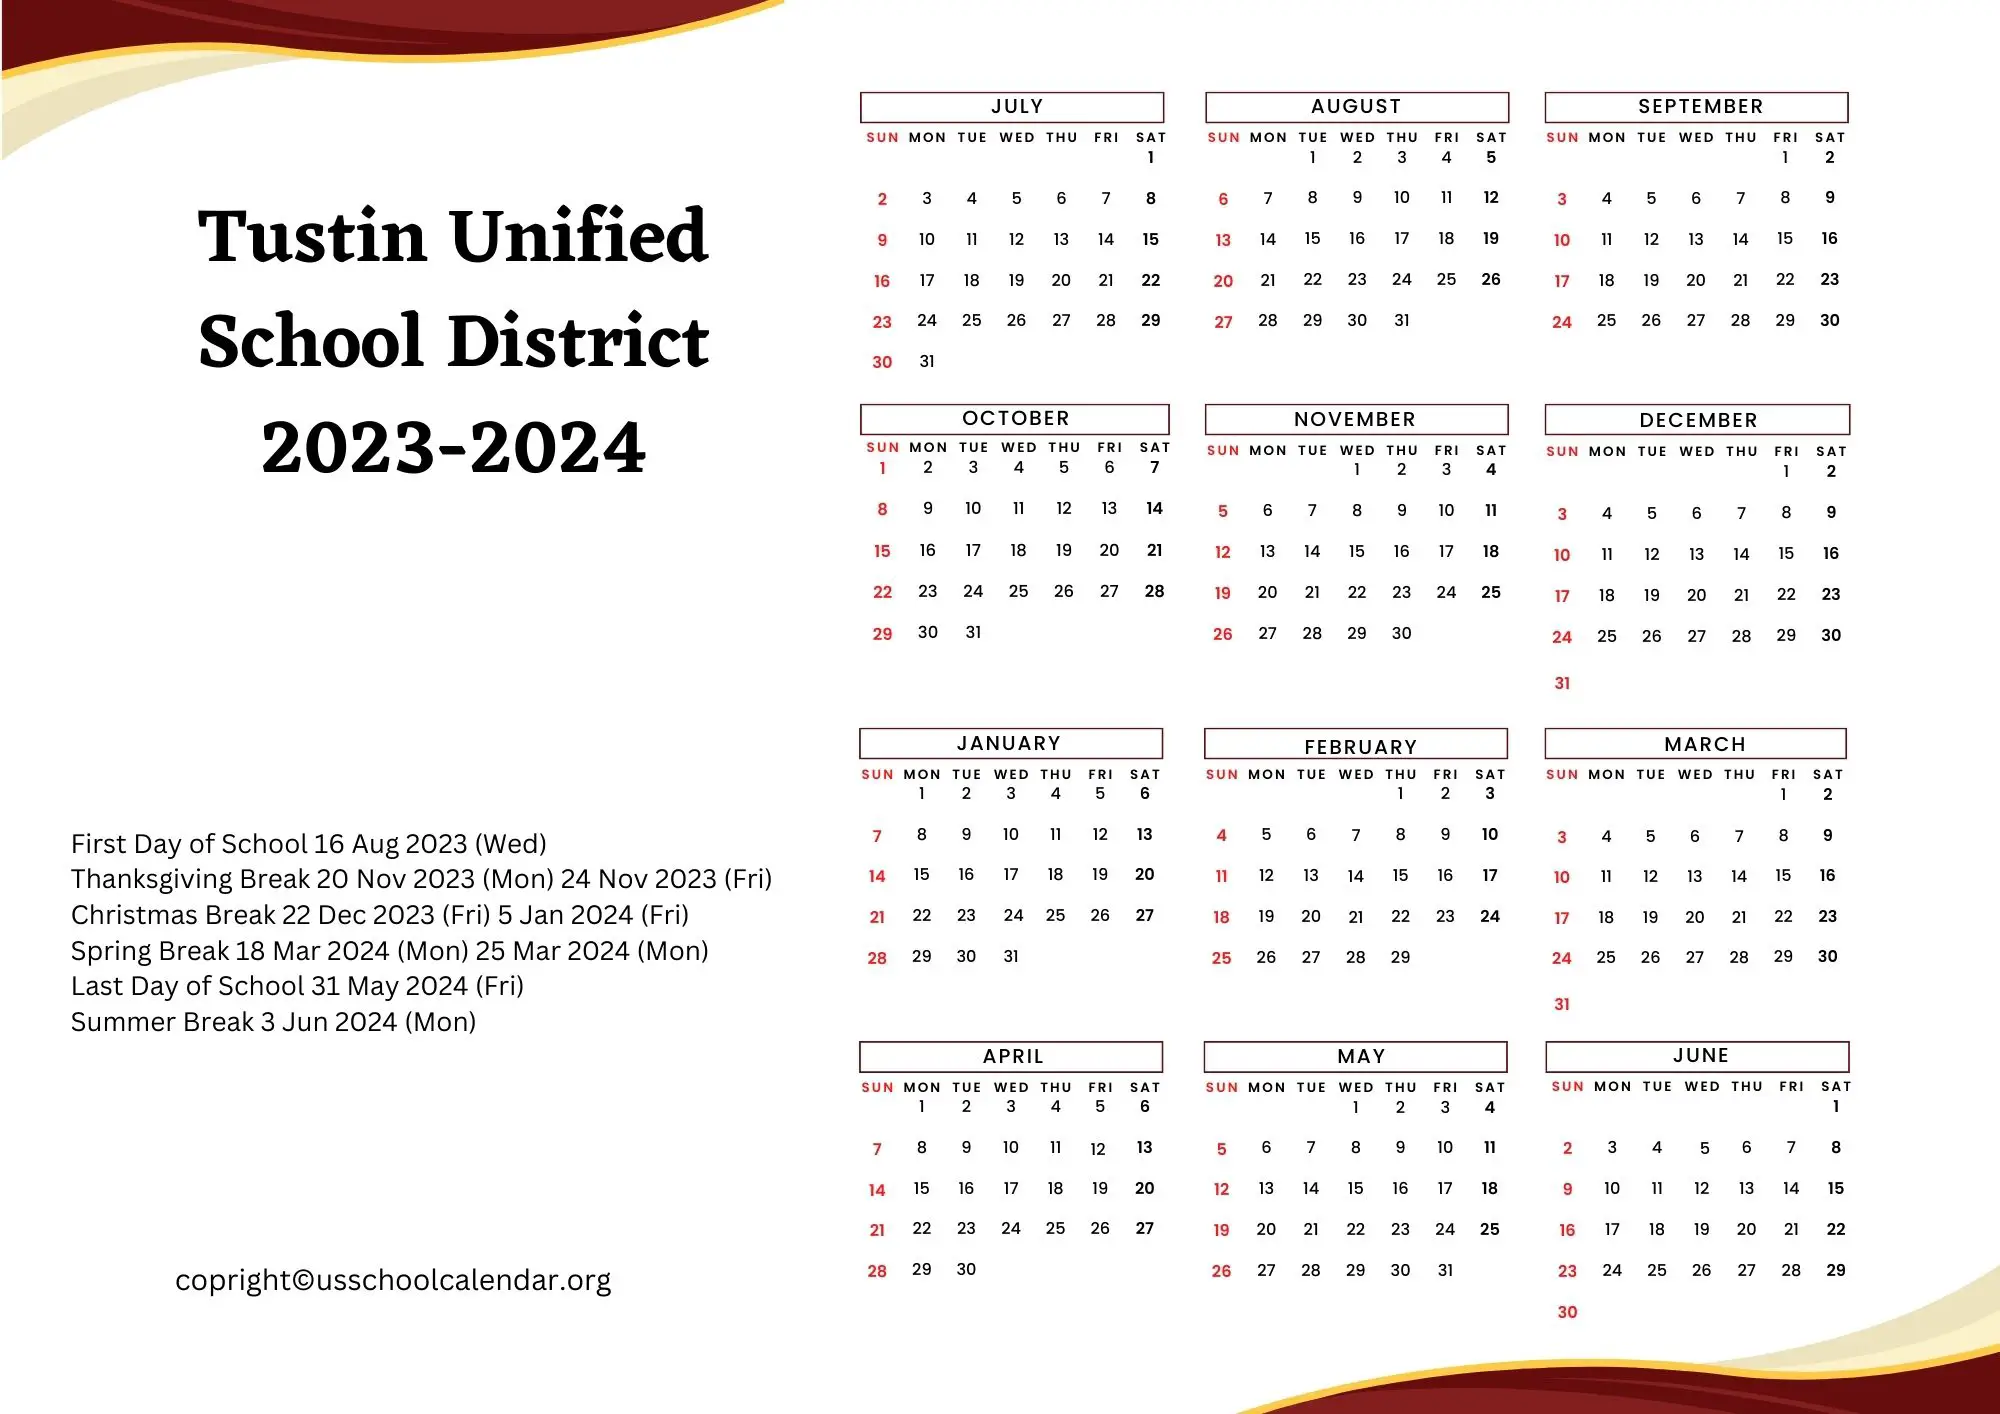 Tustin Unified School District Calendar with Holidays 2023 2024